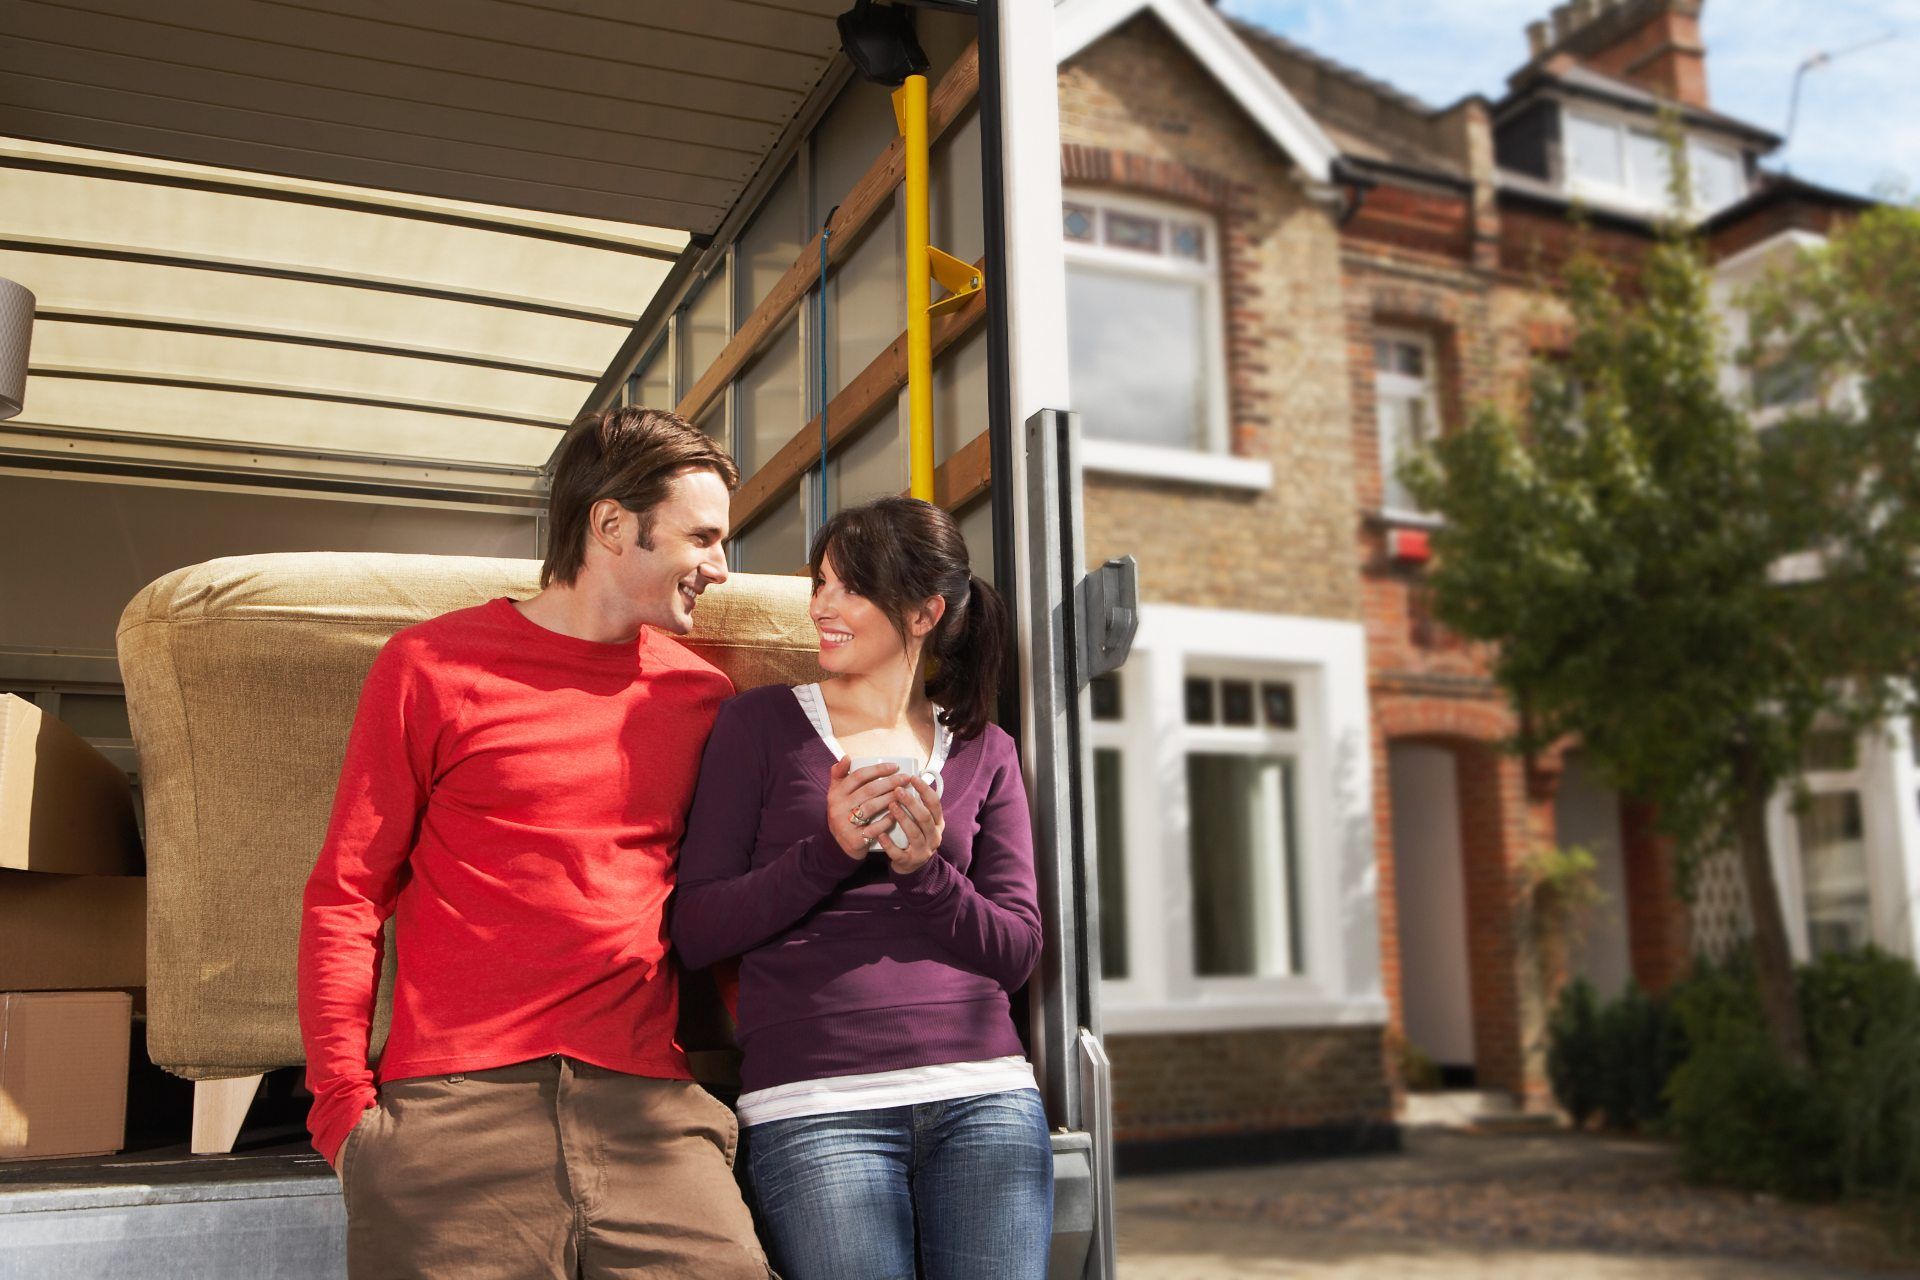 Couple leaning on back of open moving van with house in the background